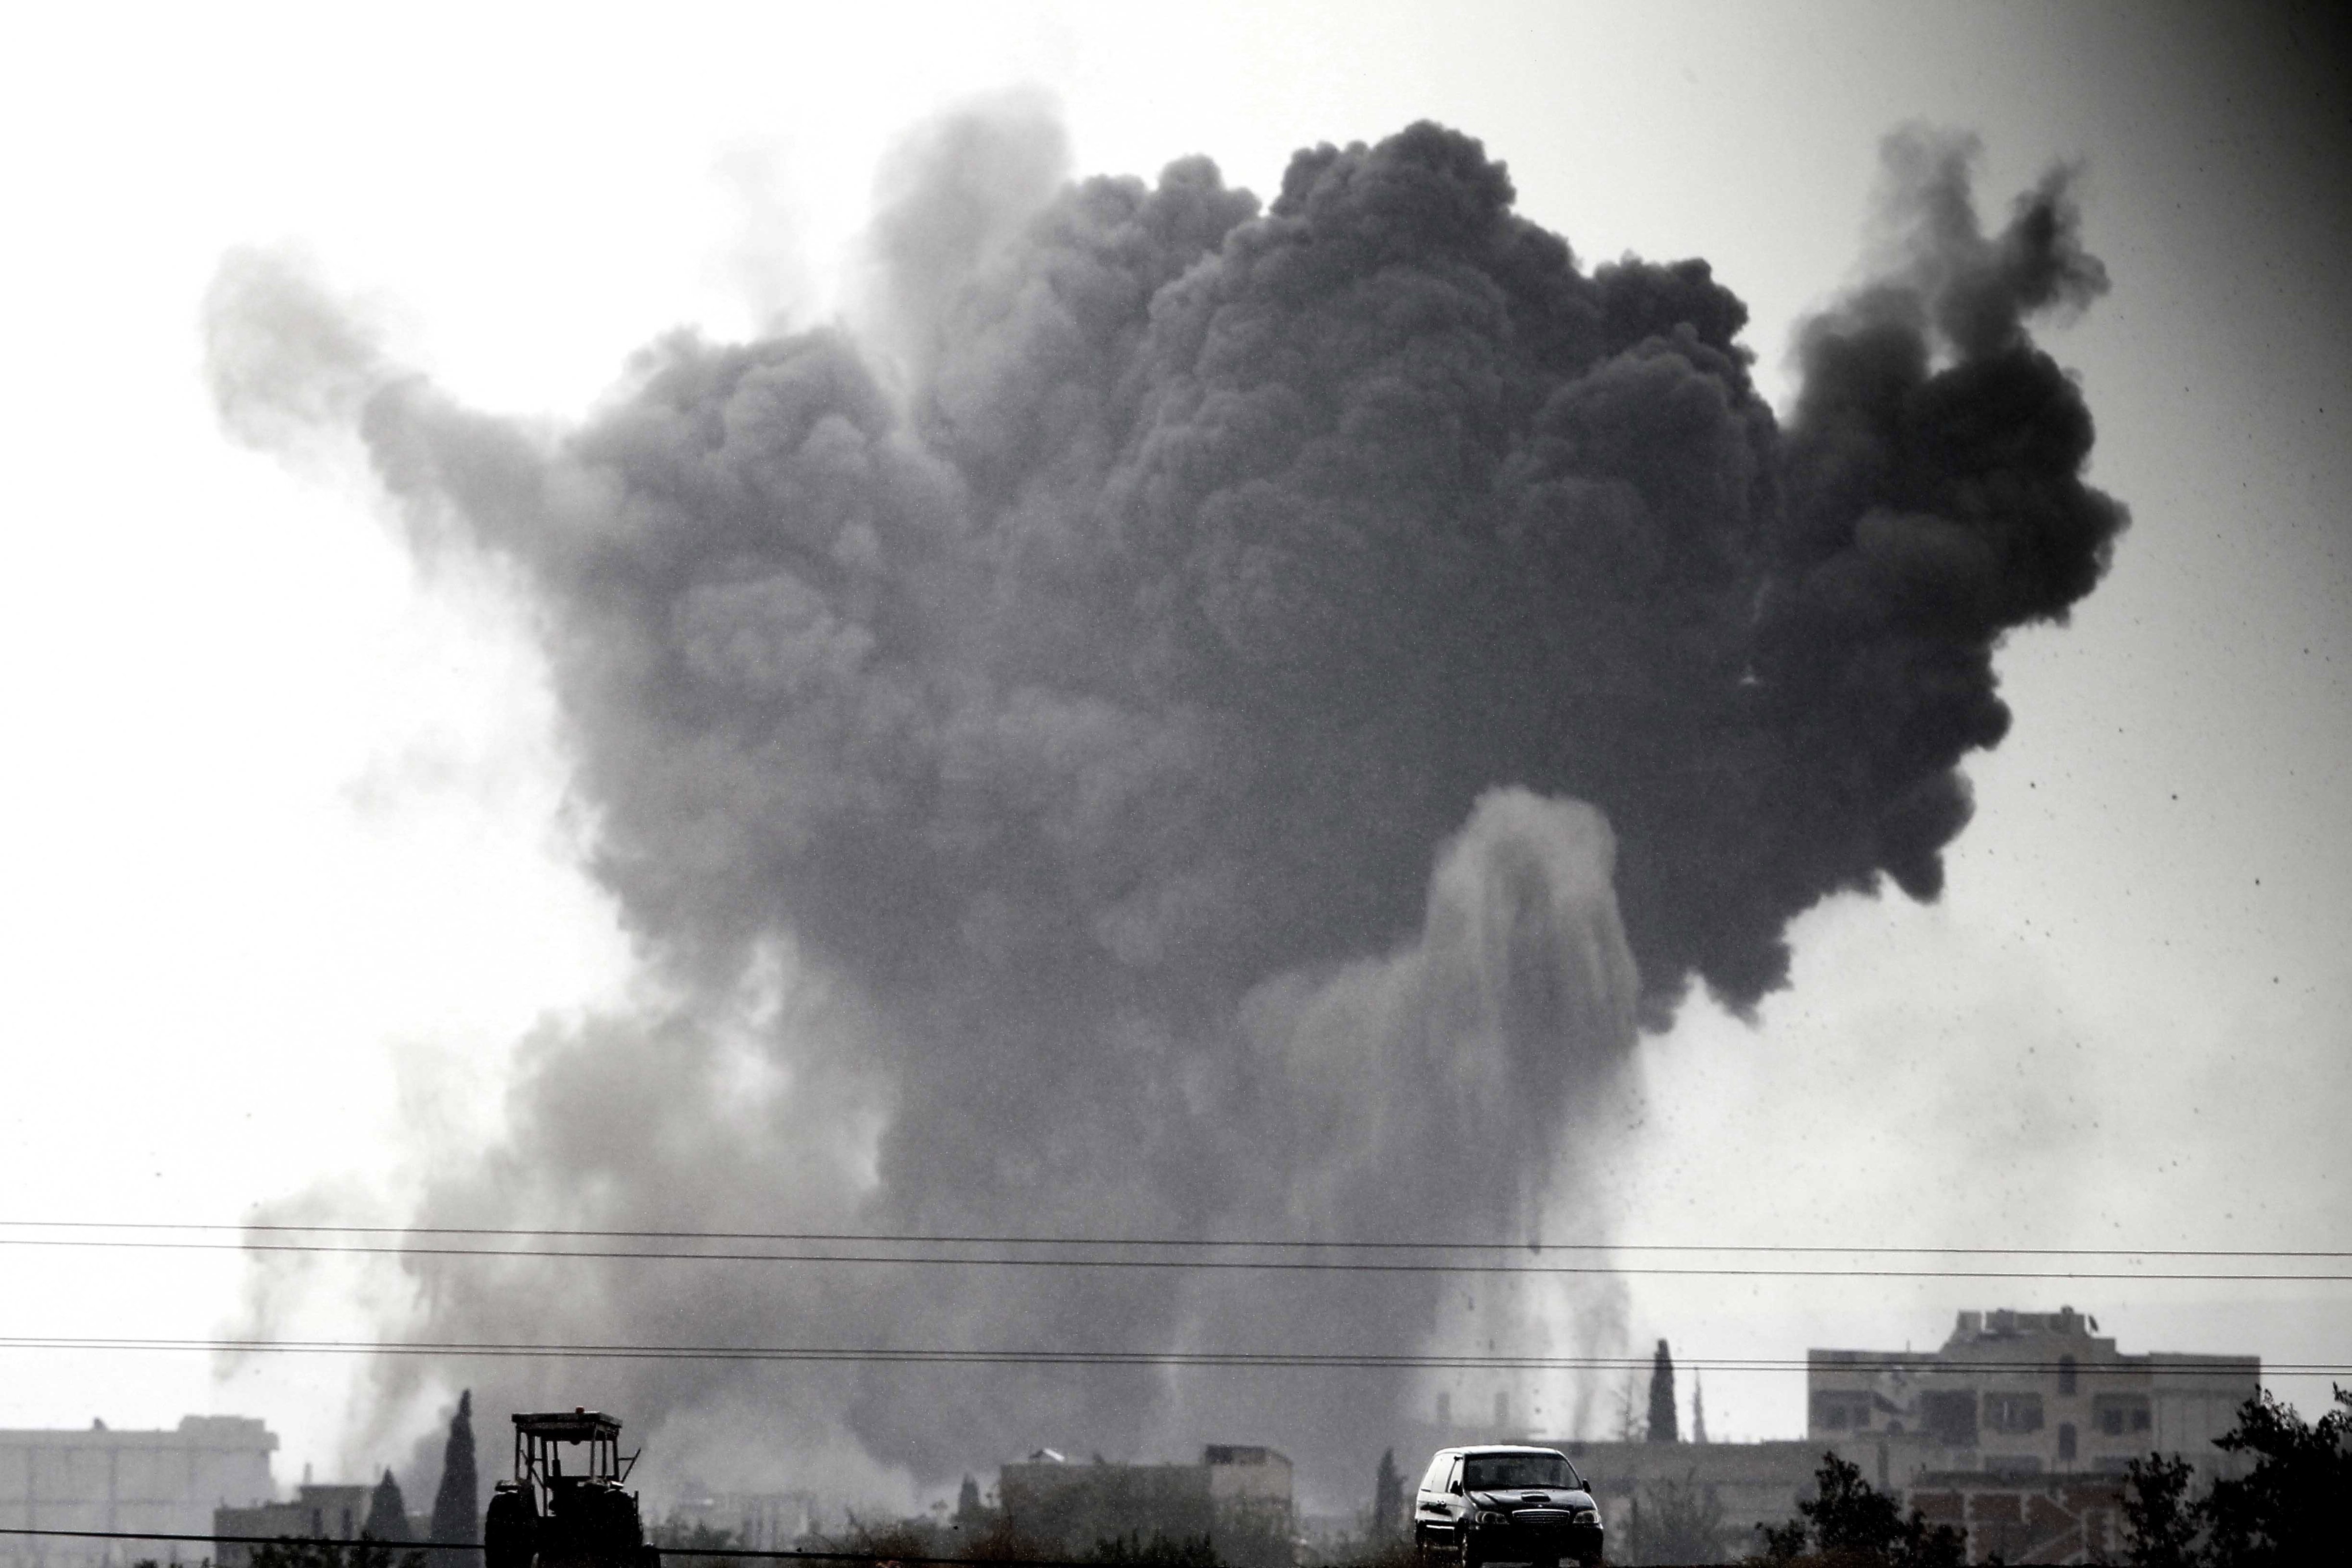 Smoke billows following an airstrike by US-led coalition aircraft in Kobani, Syria, during fighting between Syrian Kurds and militants from Islamic State, on October 14, 2014 as seen from the outskirts of Suruc, on the Turkey-Syria border. (Gokhan Sahin—Getty Images)